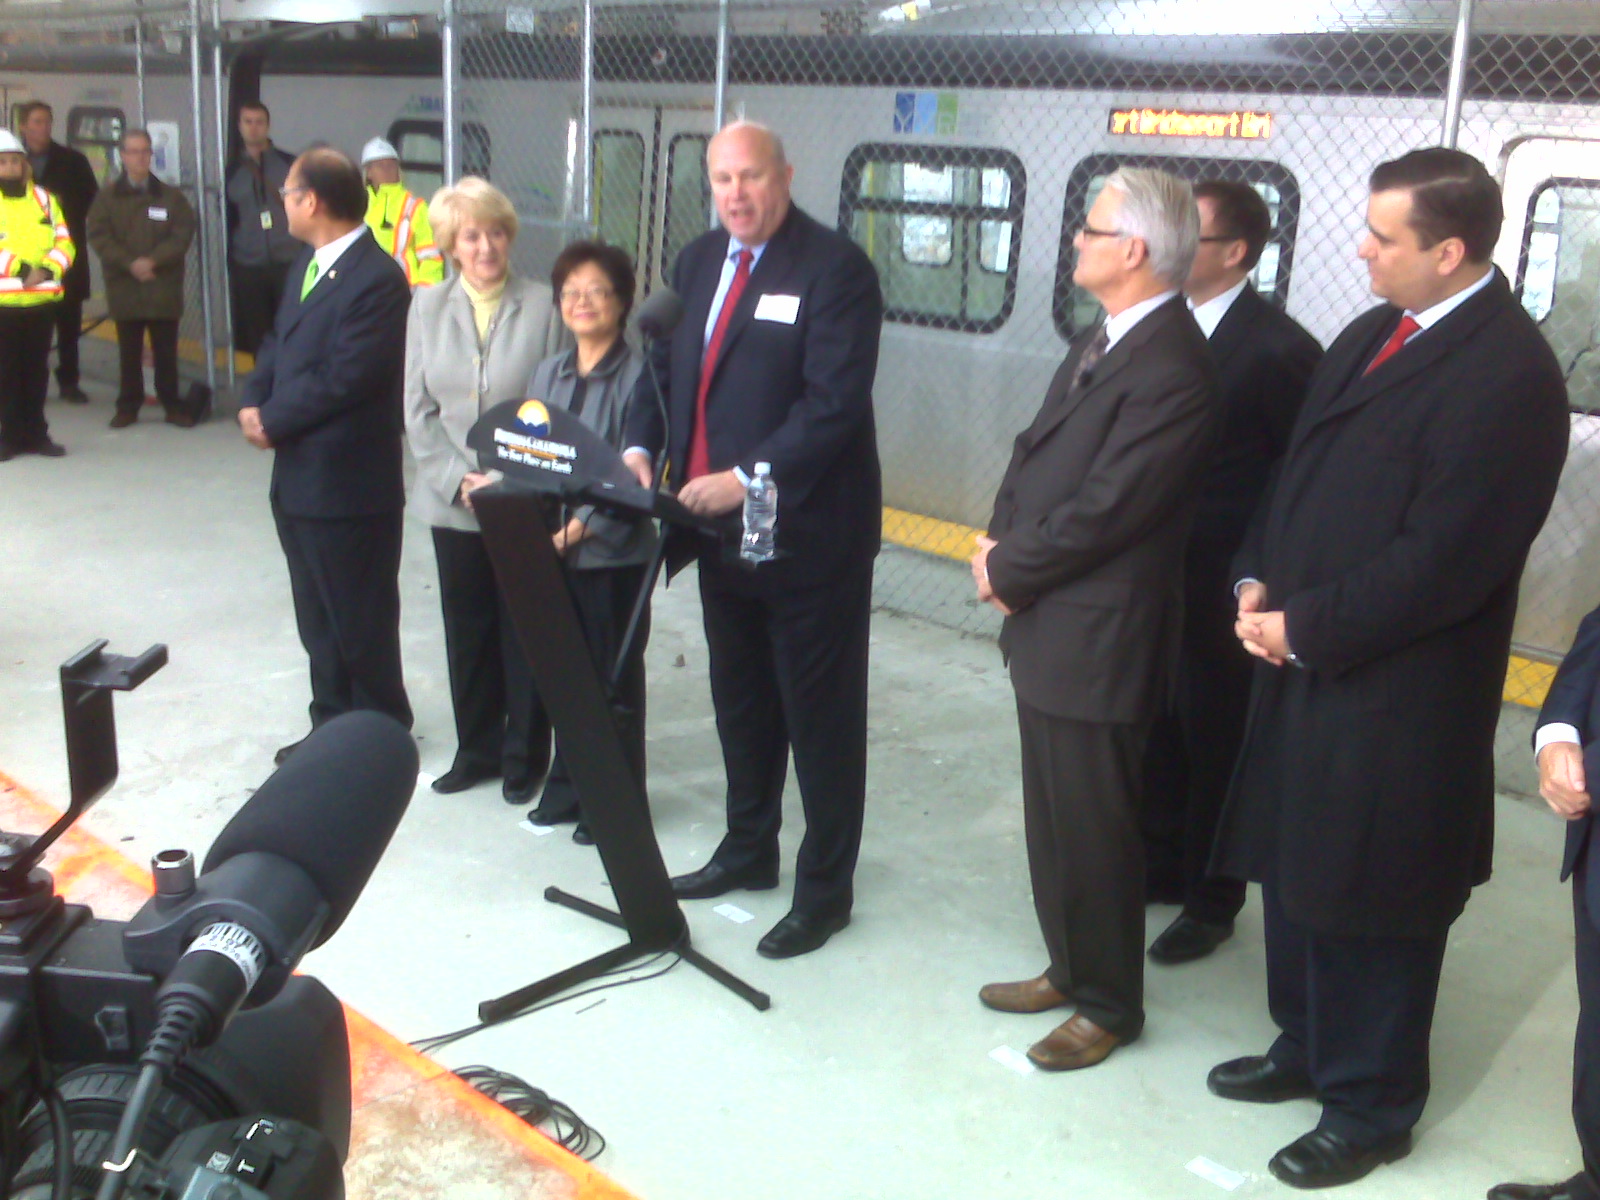 Our CEO Tom Prendergast said a few words when the train arrived at YVR. Here's a photo of him speaking, flanked by John Yap, MP (Richmond Steveston), Olga Ilich, MLA (Richmond), Alice Wong, MP (Richmond Centre), along with Premier Campbell, Minister Falcon and MP James Moore.